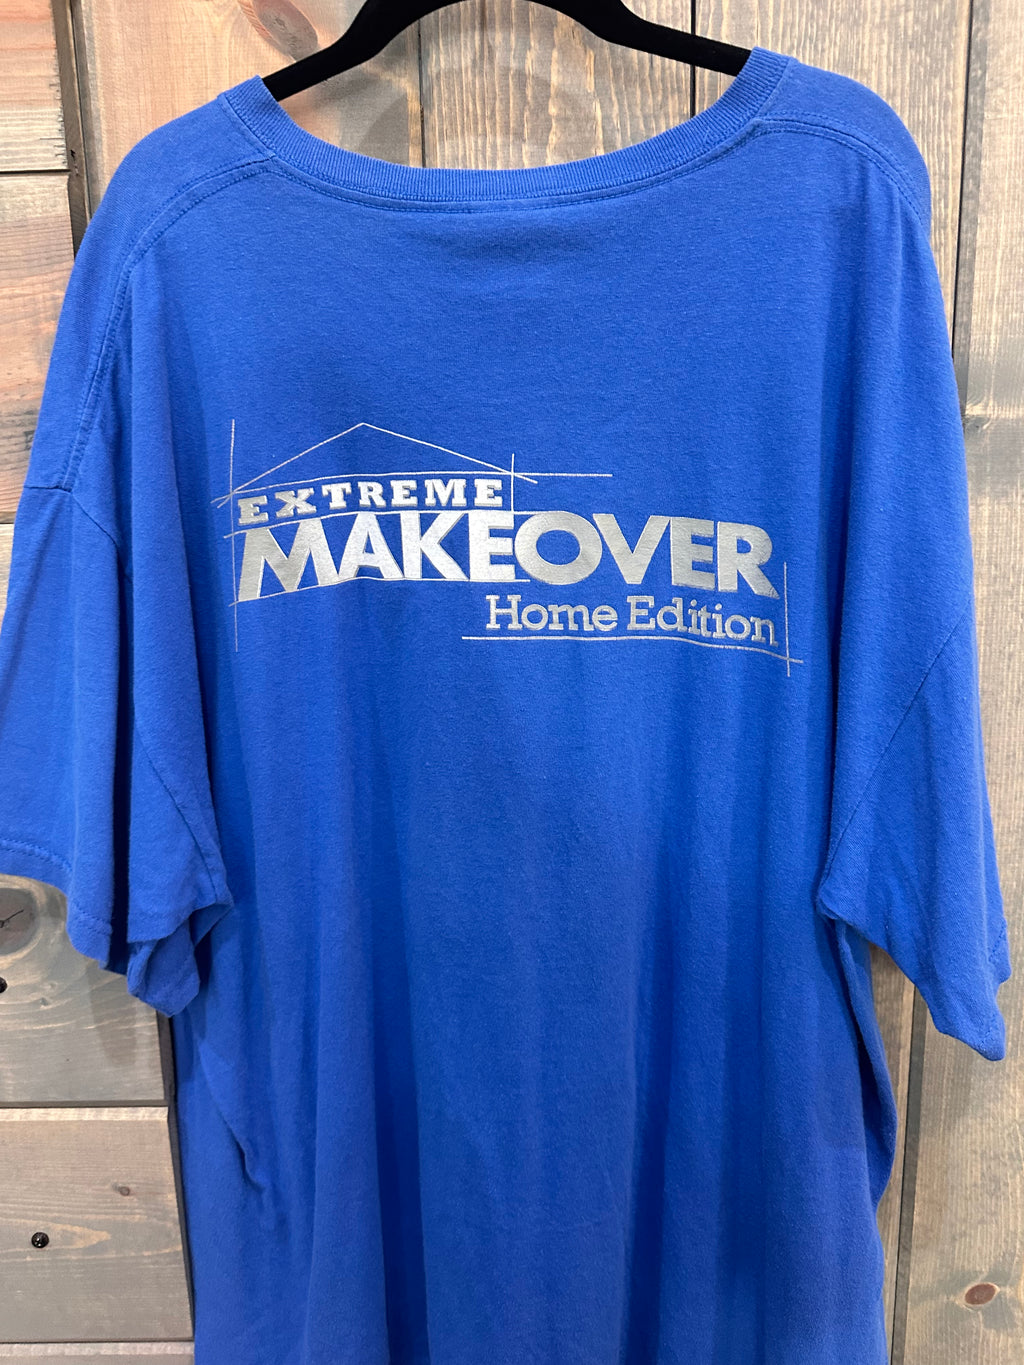 Extreme MakeOver Home Edition Tee